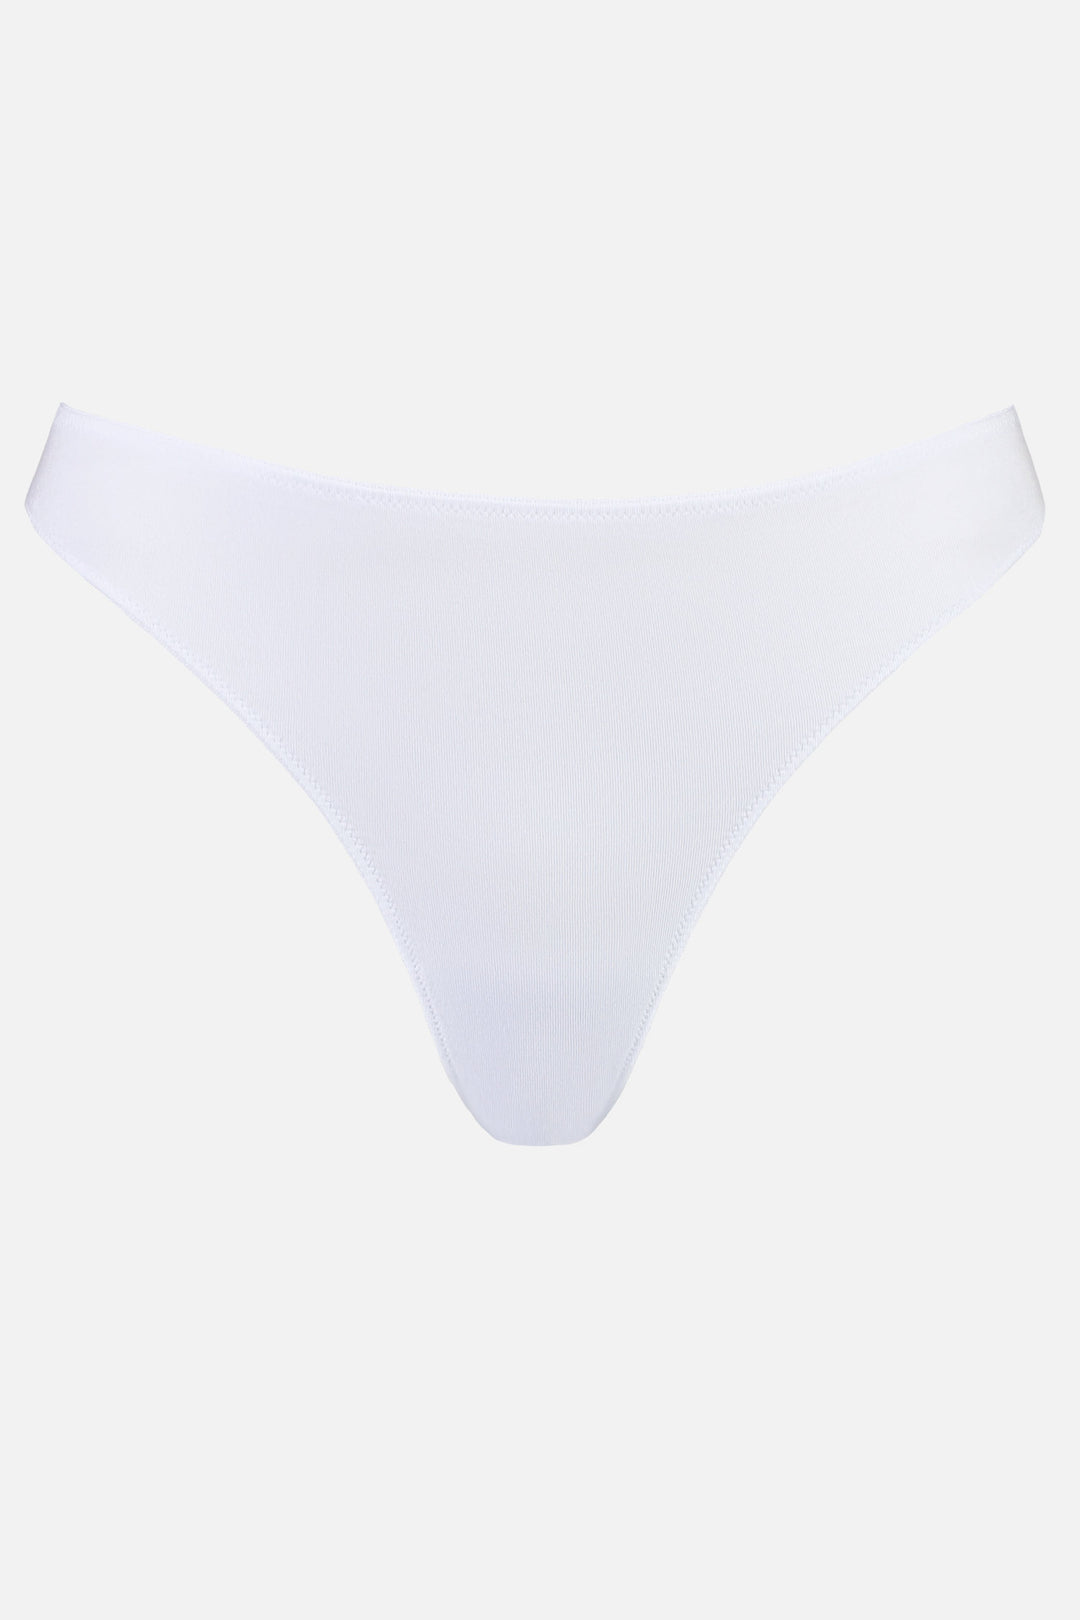 Videris Lingerie thong in white TENCEL™ a comfortable mid-rise style cut to follow the natural curve of your hips